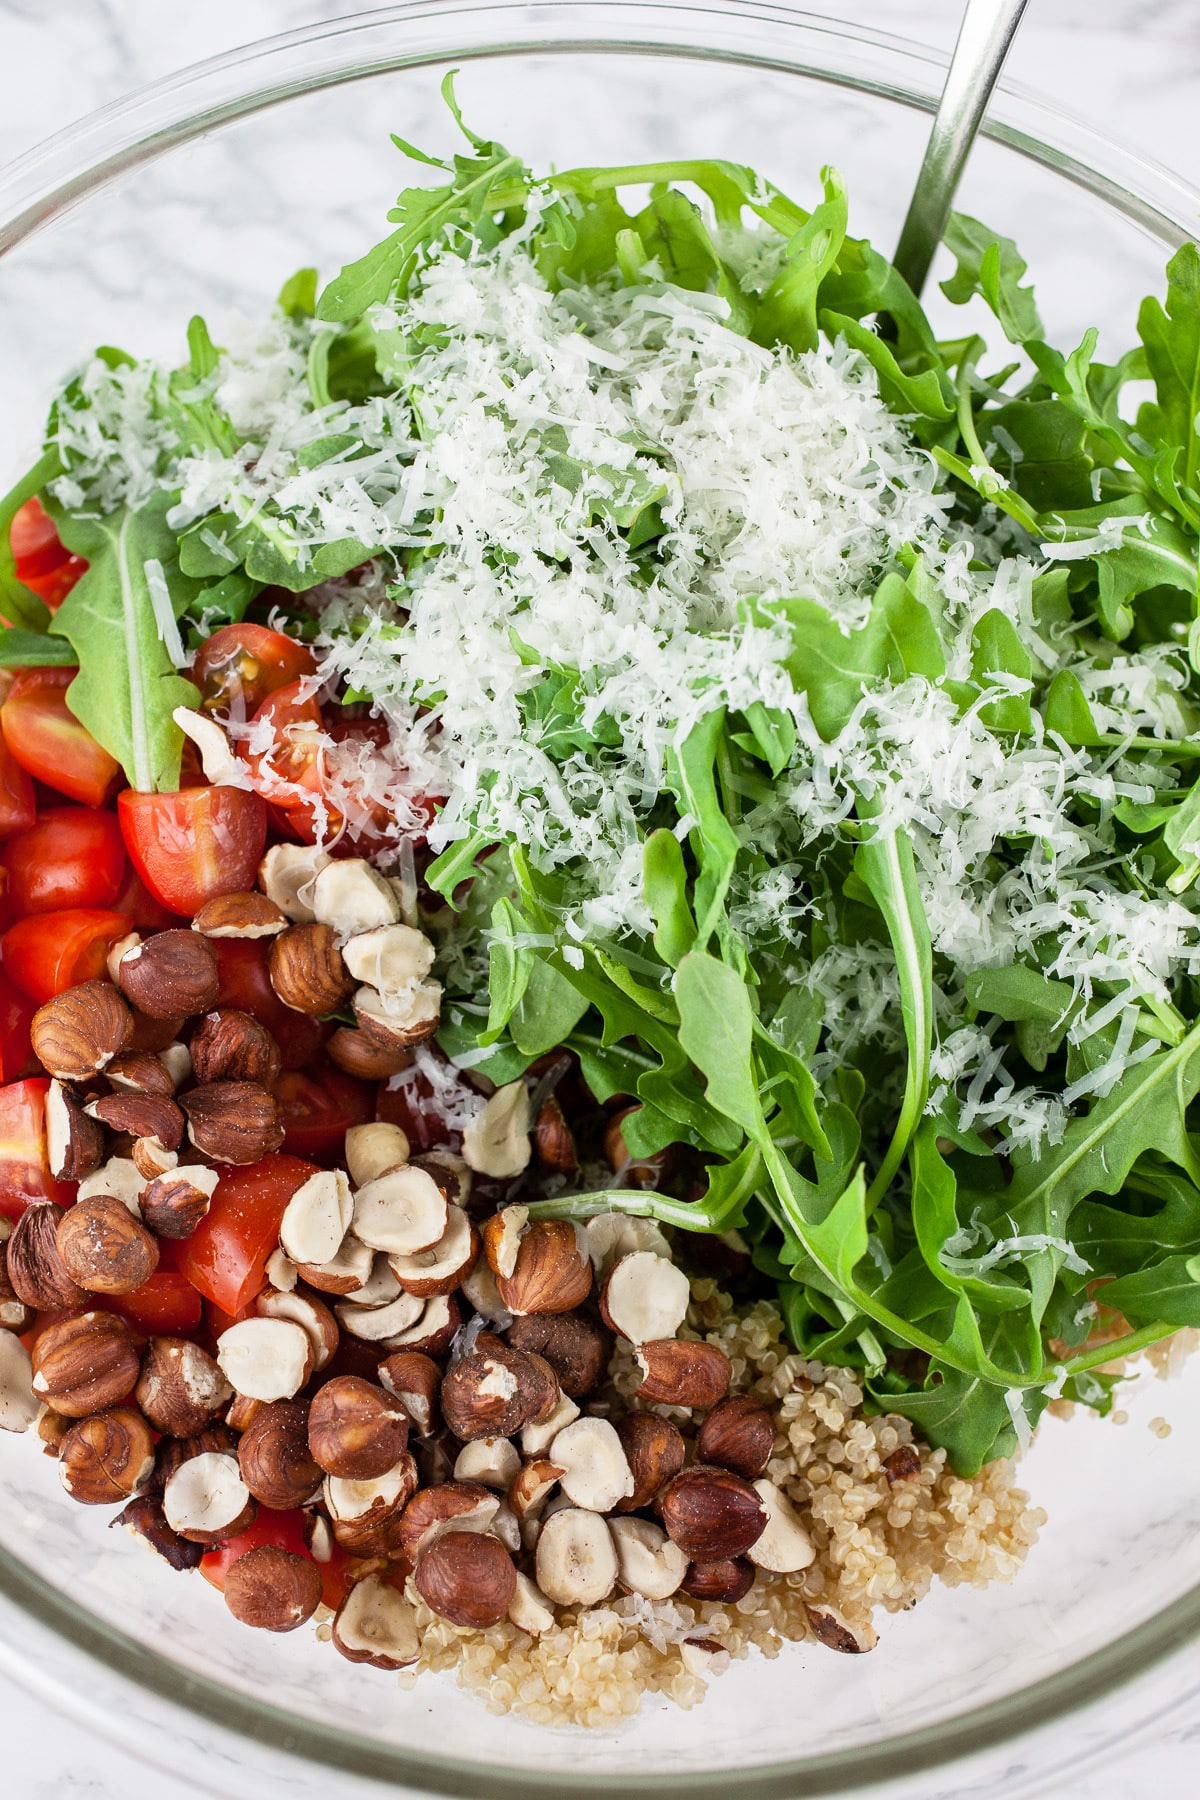 Quinoa, hazelnuts, tomatoes, arugula, and Parmesan cheese in large glass bowl with spoon.